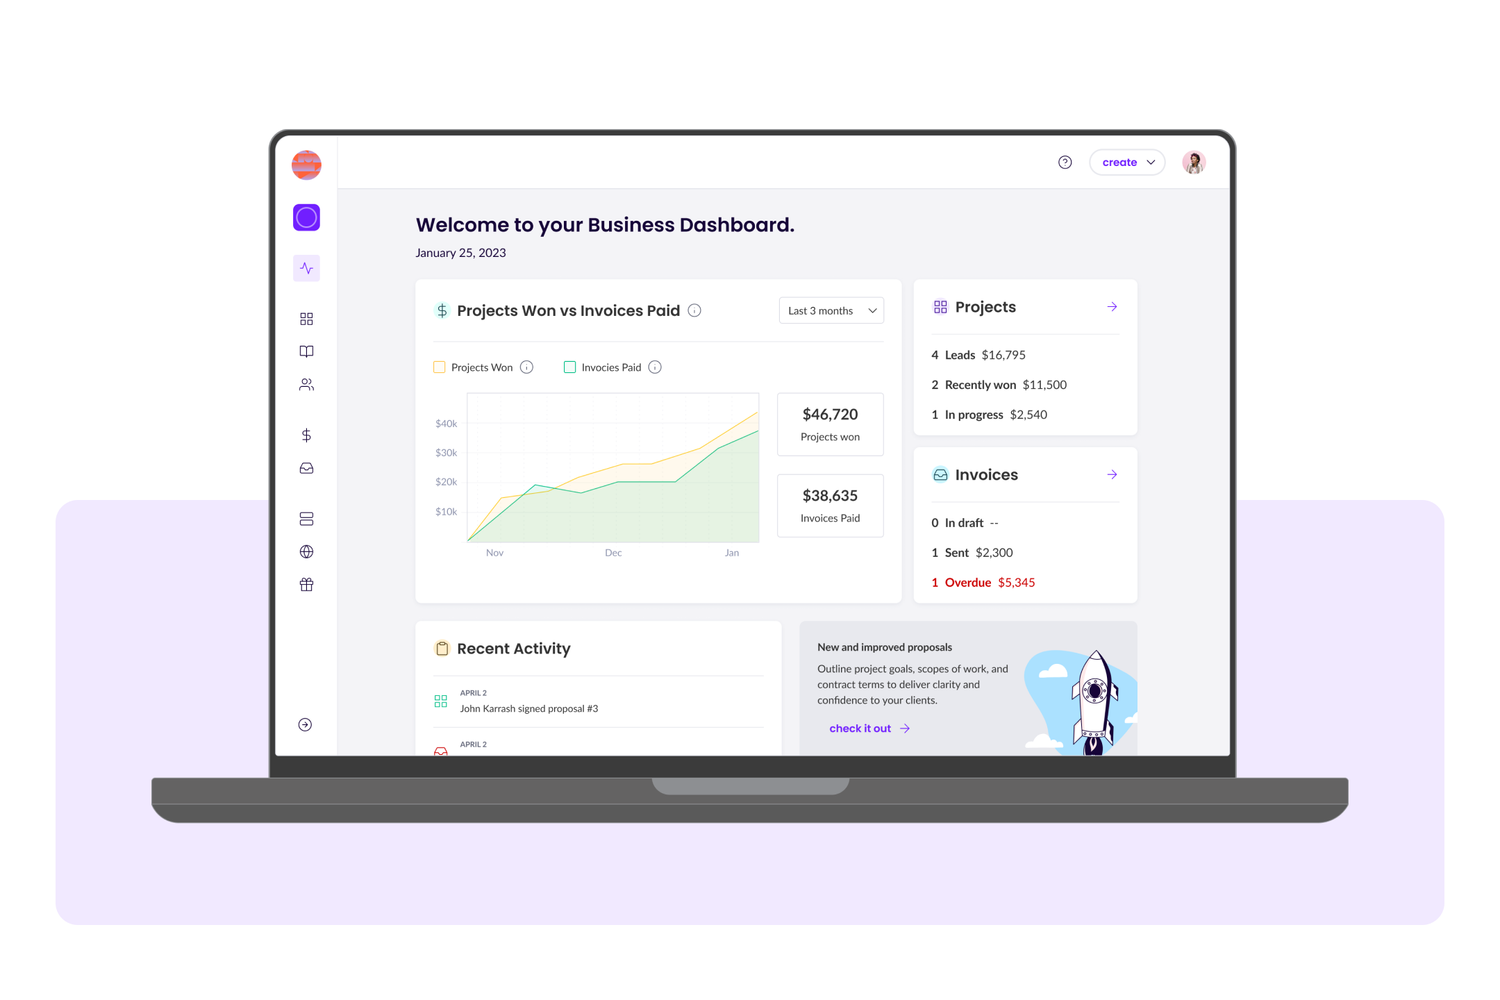 Your Business Dashboard on Wethos is a home for your freelance business where you can monitor your project pipeline, invoice status, and see any new developments with proposal status in order to keep tabs on where your client is at in the process.